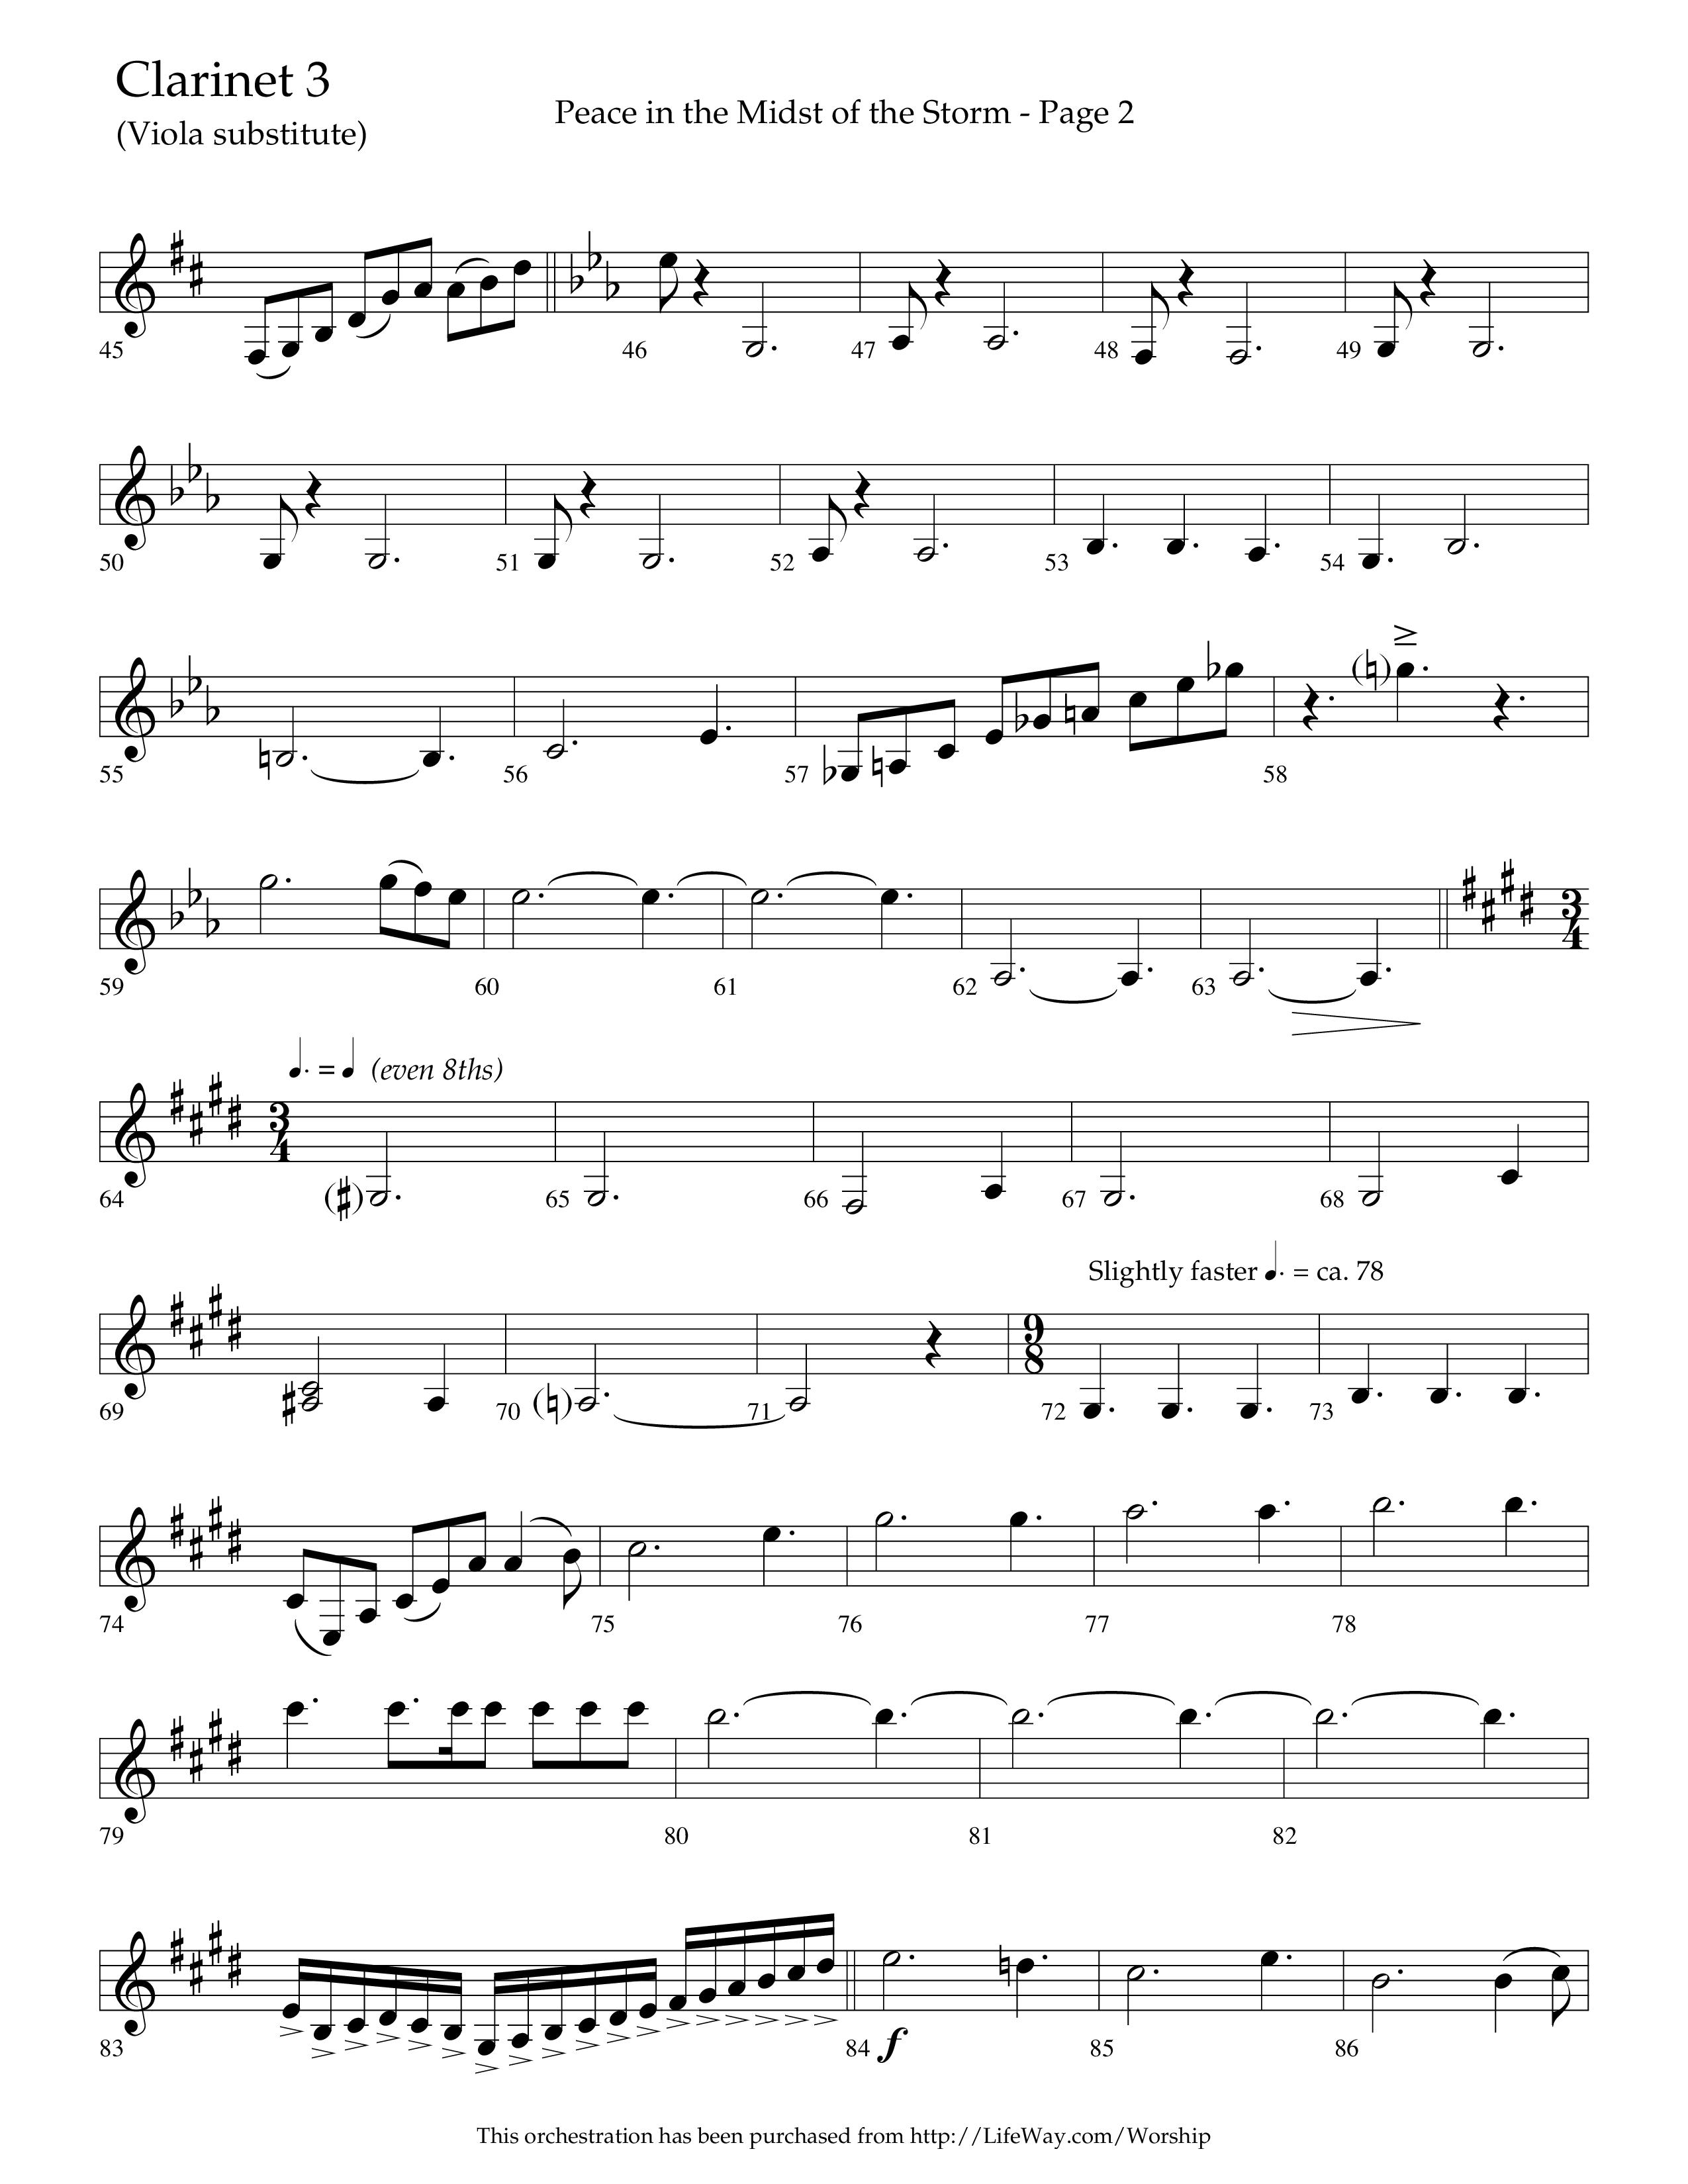 Peace In The Midst Of The Storm (Choral Anthem SATB) Clarinet 3 (Lifeway Choral / Arr. David T. Clydesdale)